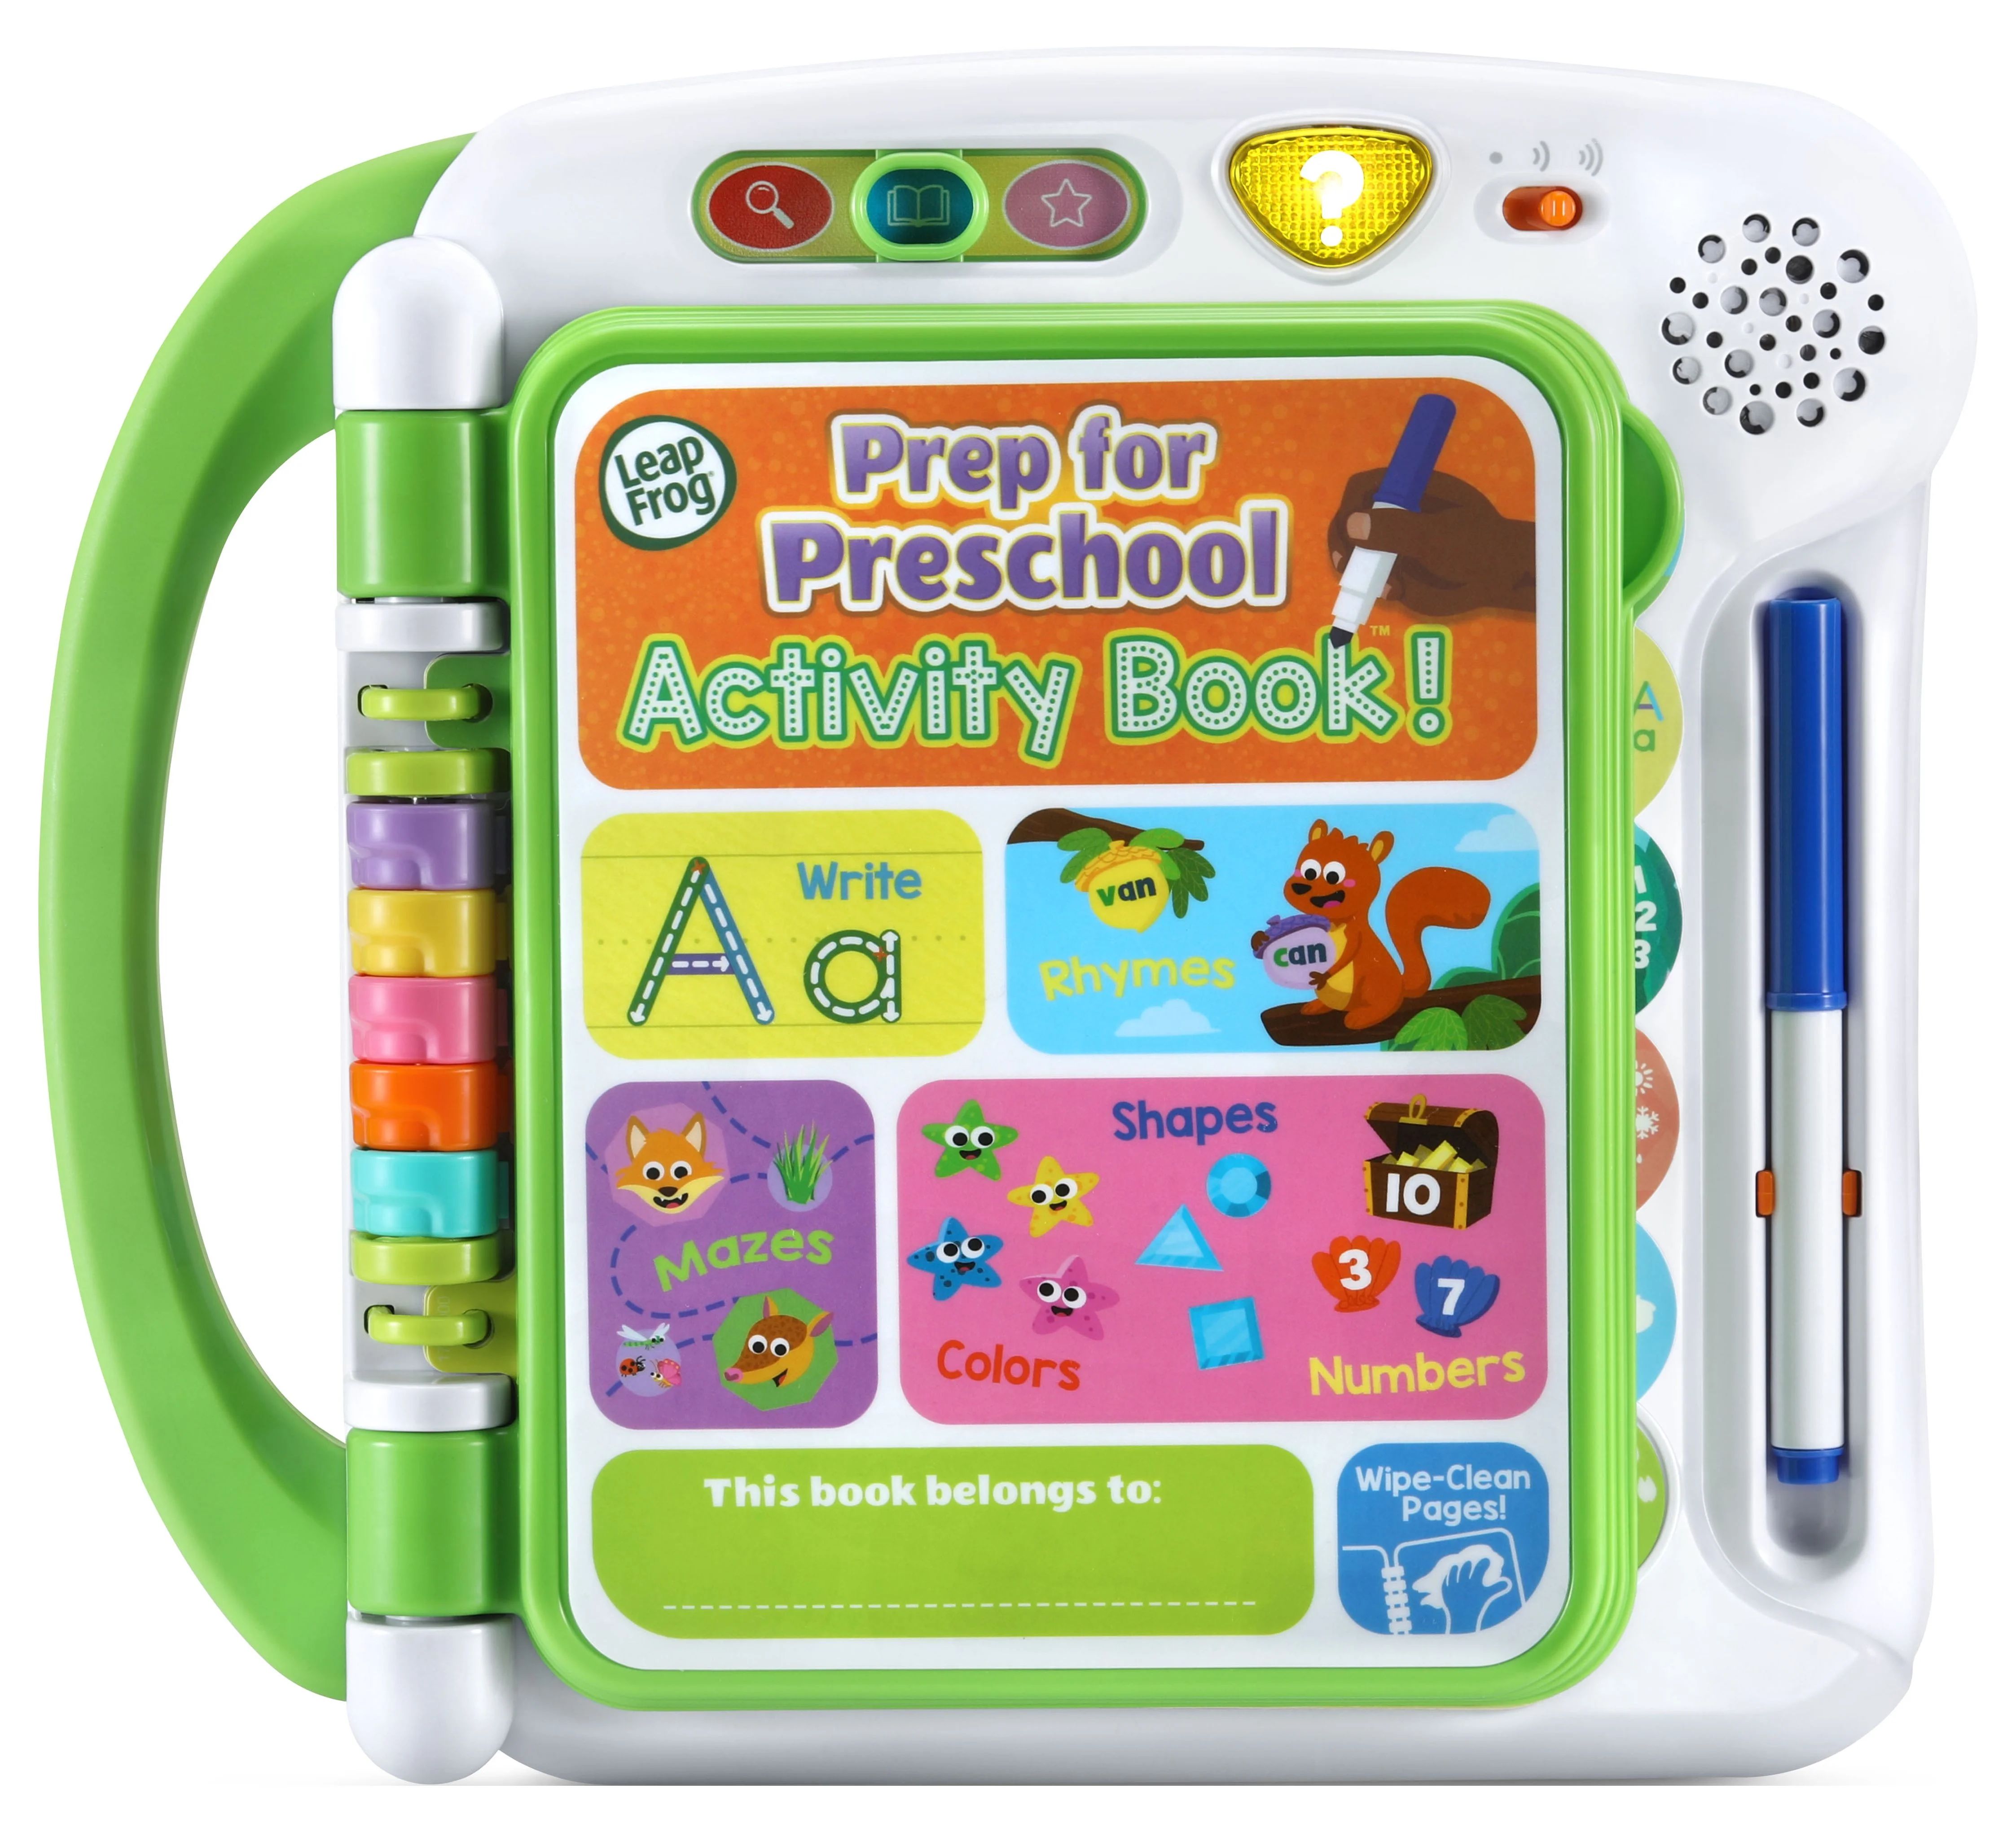 LeapFrog Prep for Preschool Activity Book with Reusable Pages, Learning Toy for Preschoolers | Walmart (US)